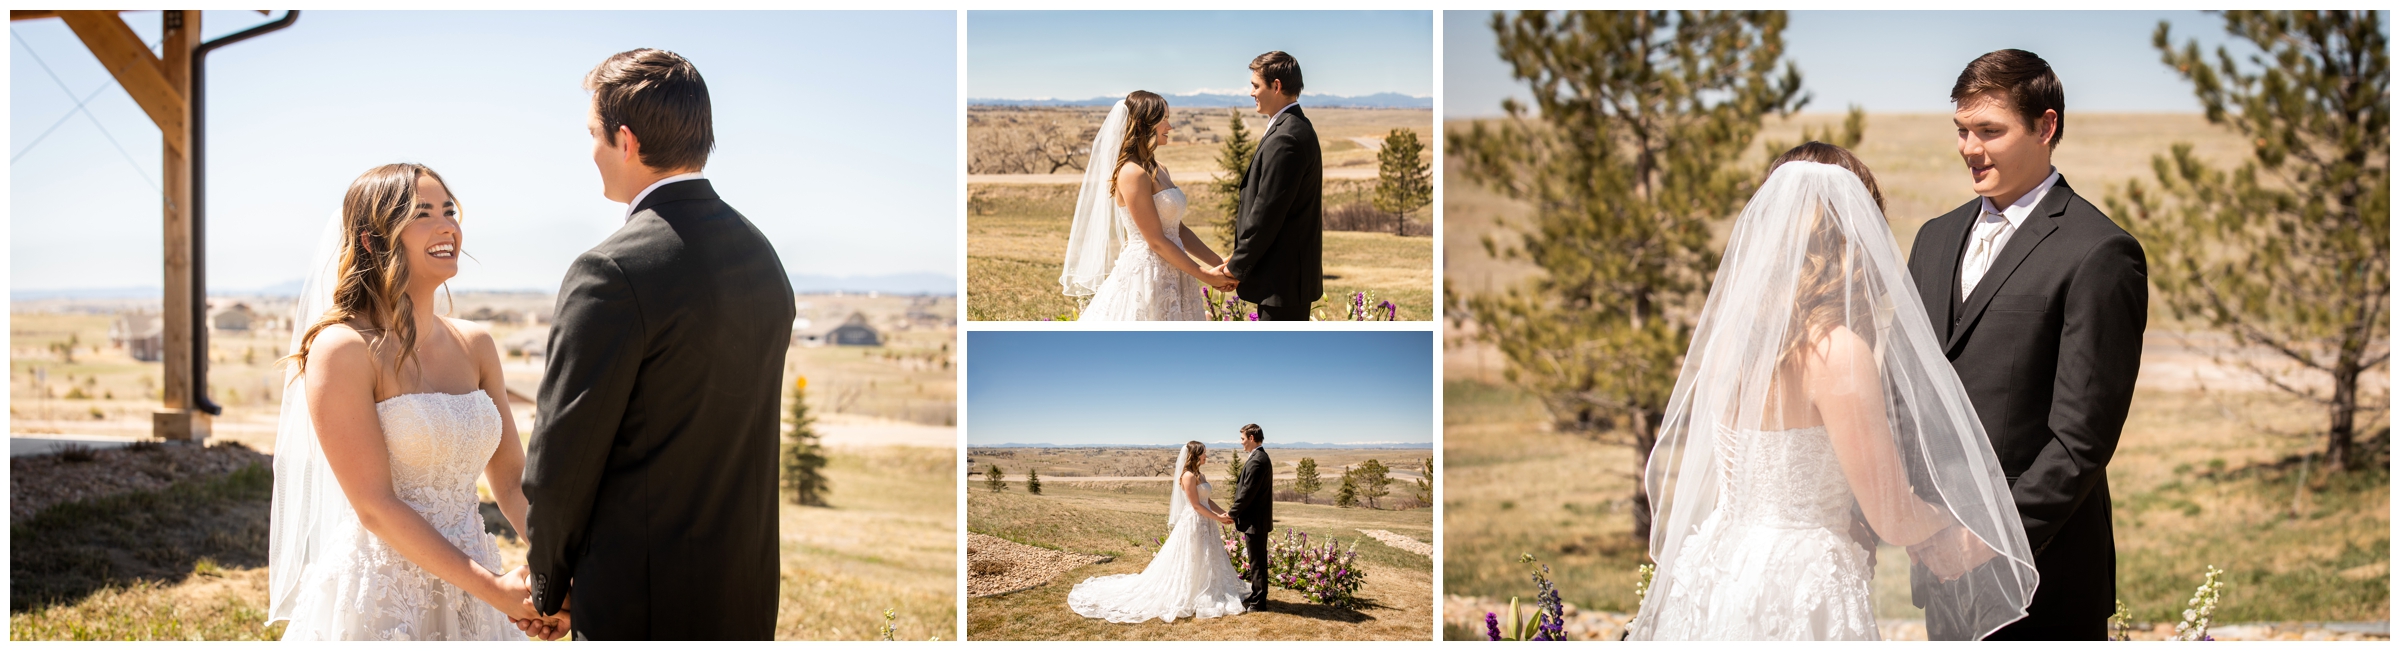 couple saying vows during outdoor wedding ceremony at Bonnie Blues Event Venue in Colorado 